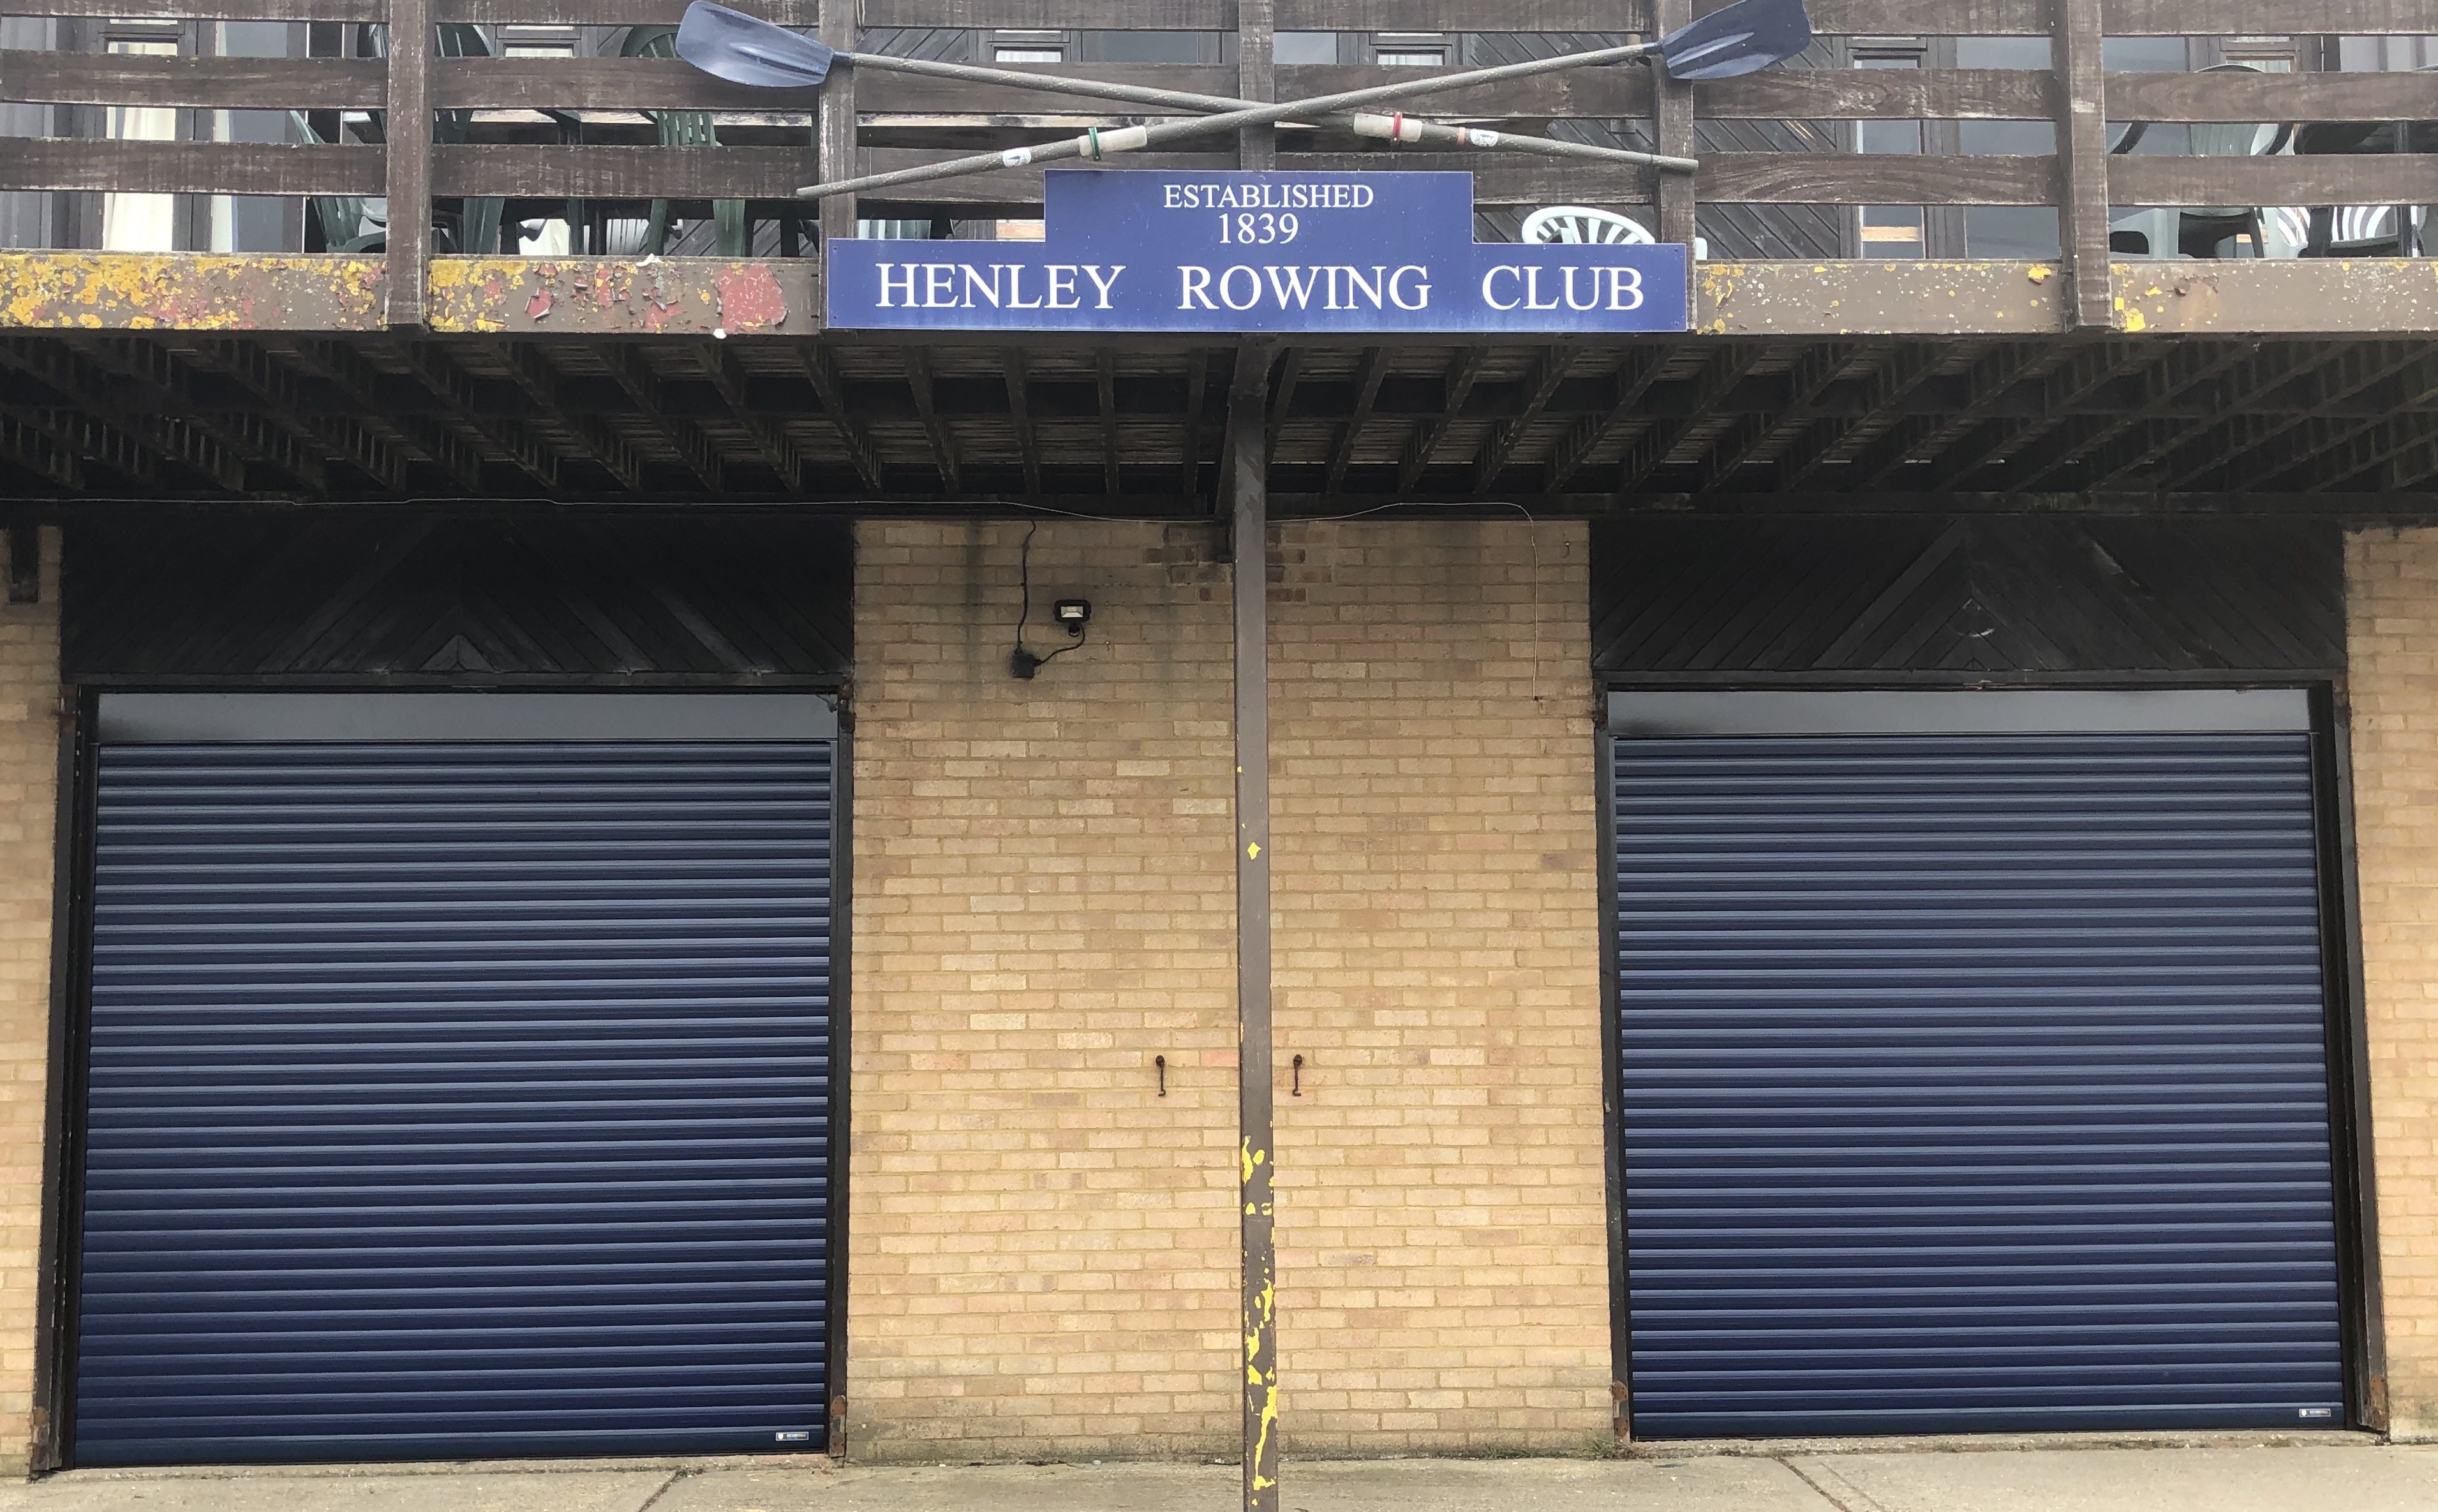 Aluroll insulated roller shutters in Steel Blue installed on a Henley Rowing Club